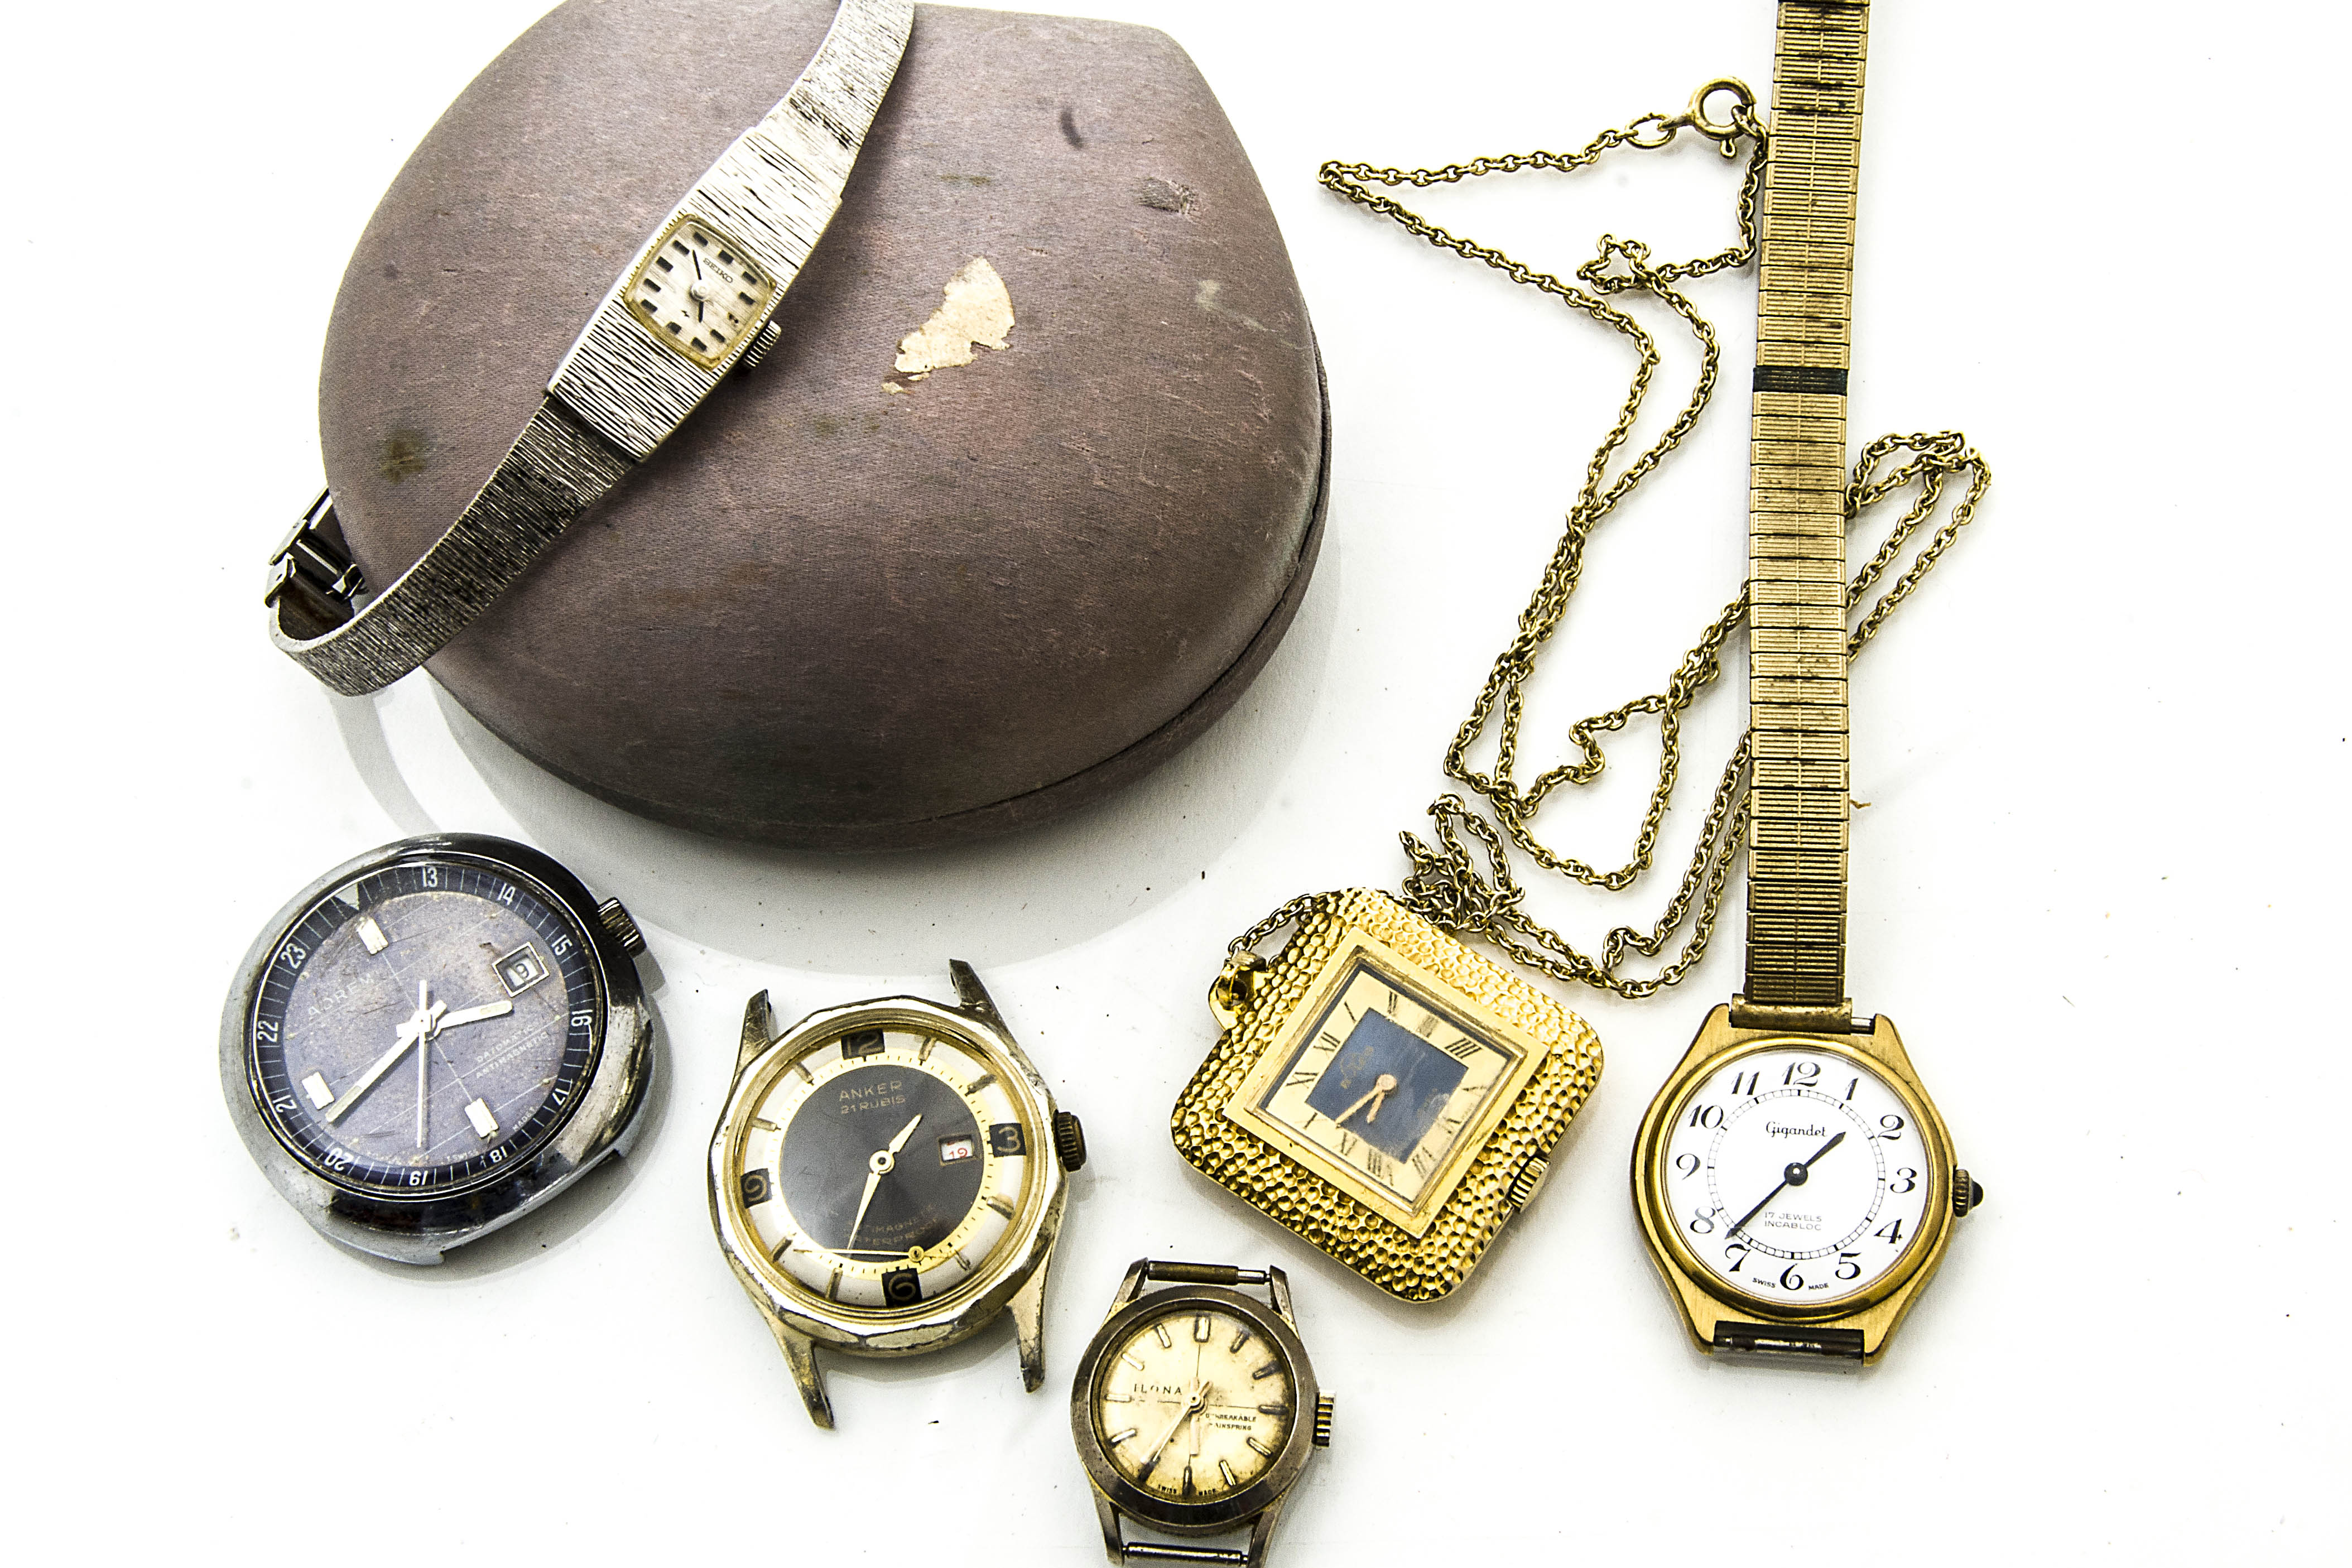 Six vintage and modern watches, including an Adrem Datomatic, an Anker, a Seiko in box, and three